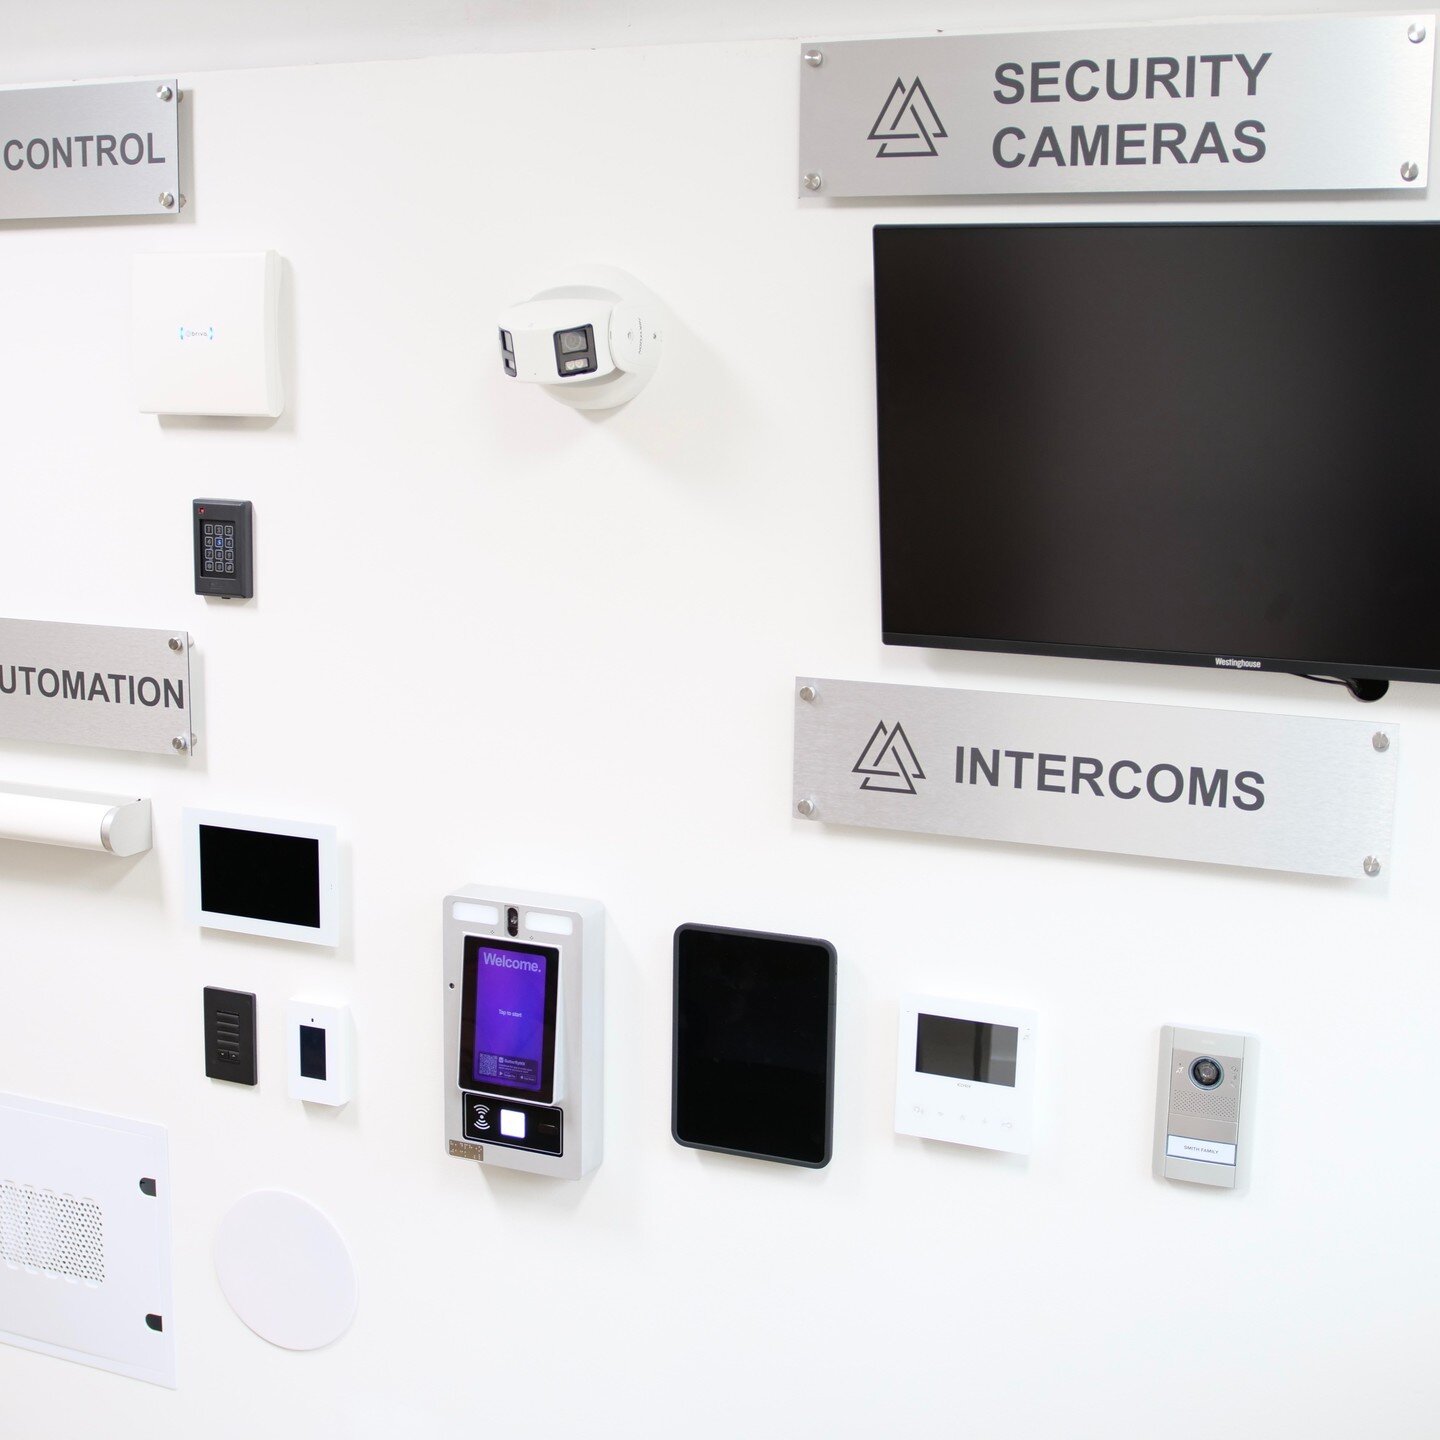 Looking for advanced security solutions? Contact our team today to learn how we can help protect you and your property.